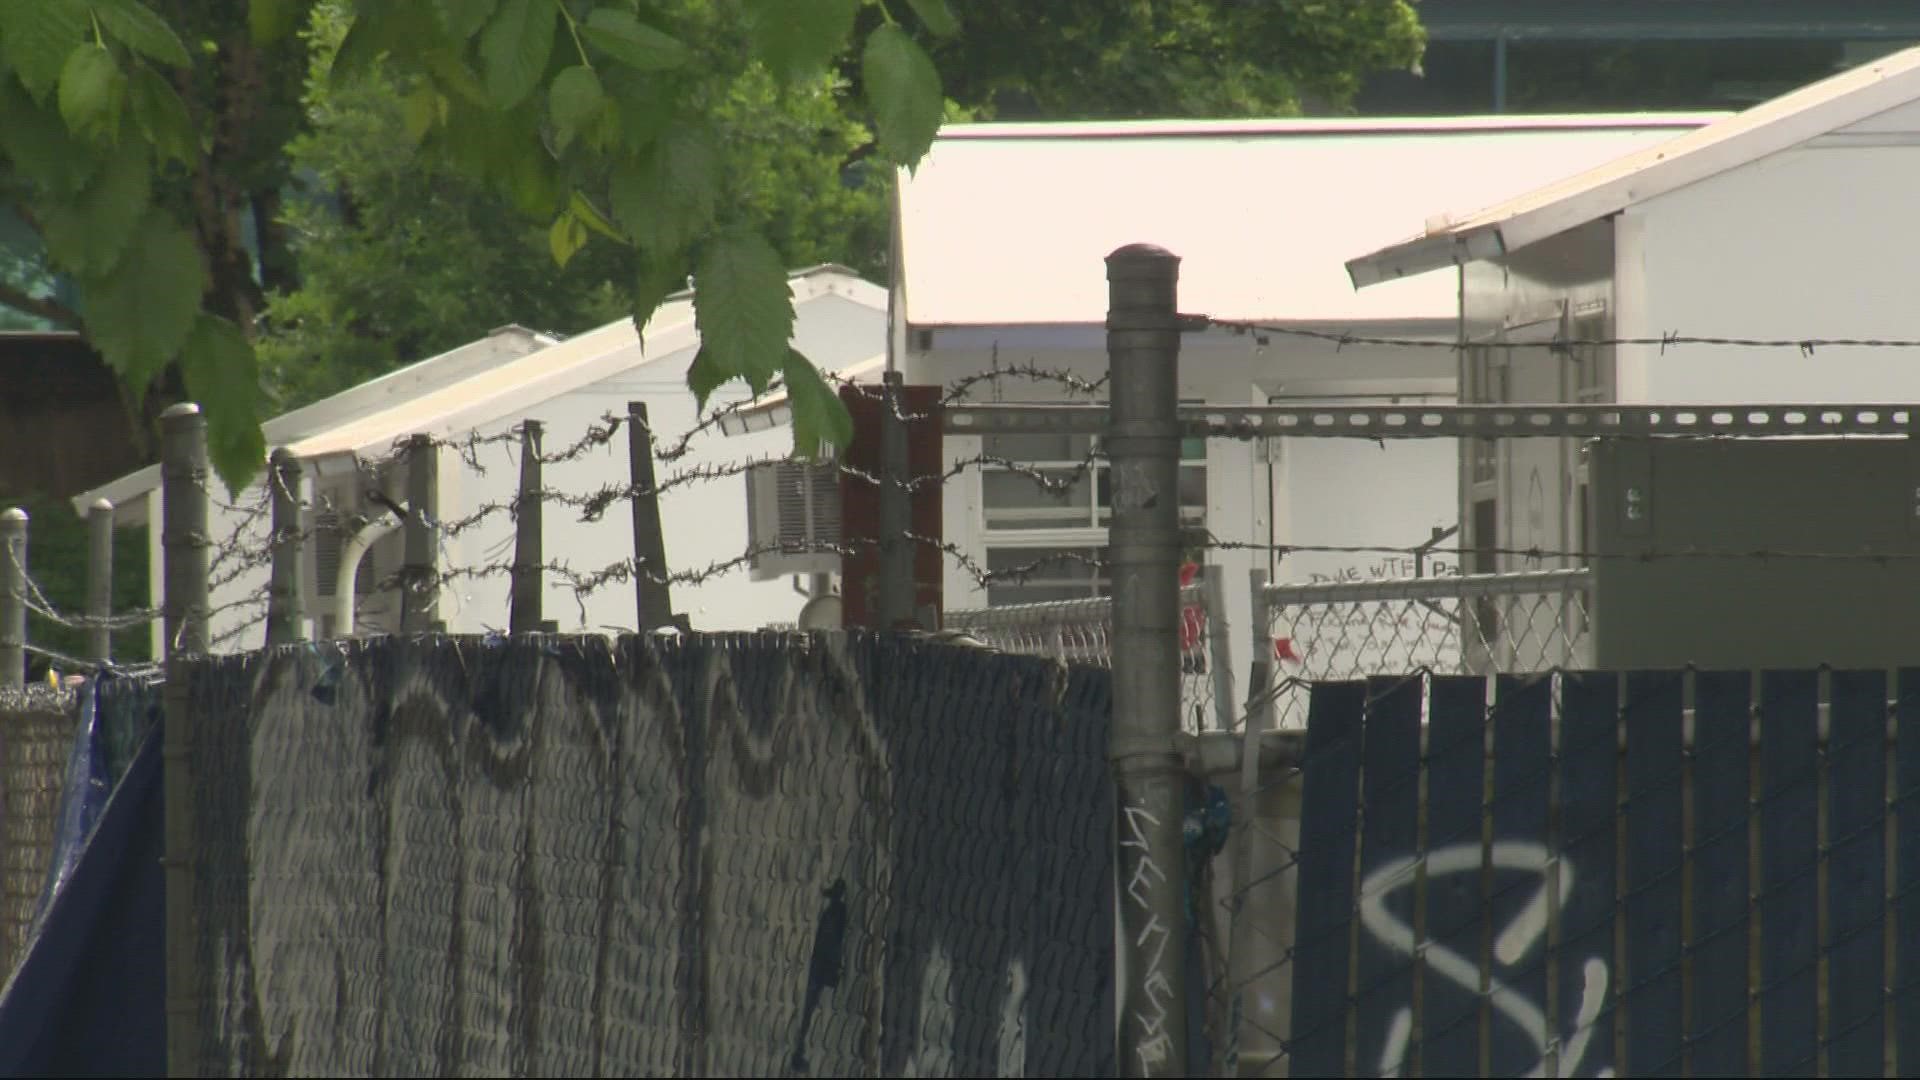 The nonprofit that runs the homeless village said the area has gotten too unsafe to continue operations. KGW's Blair Best explains.